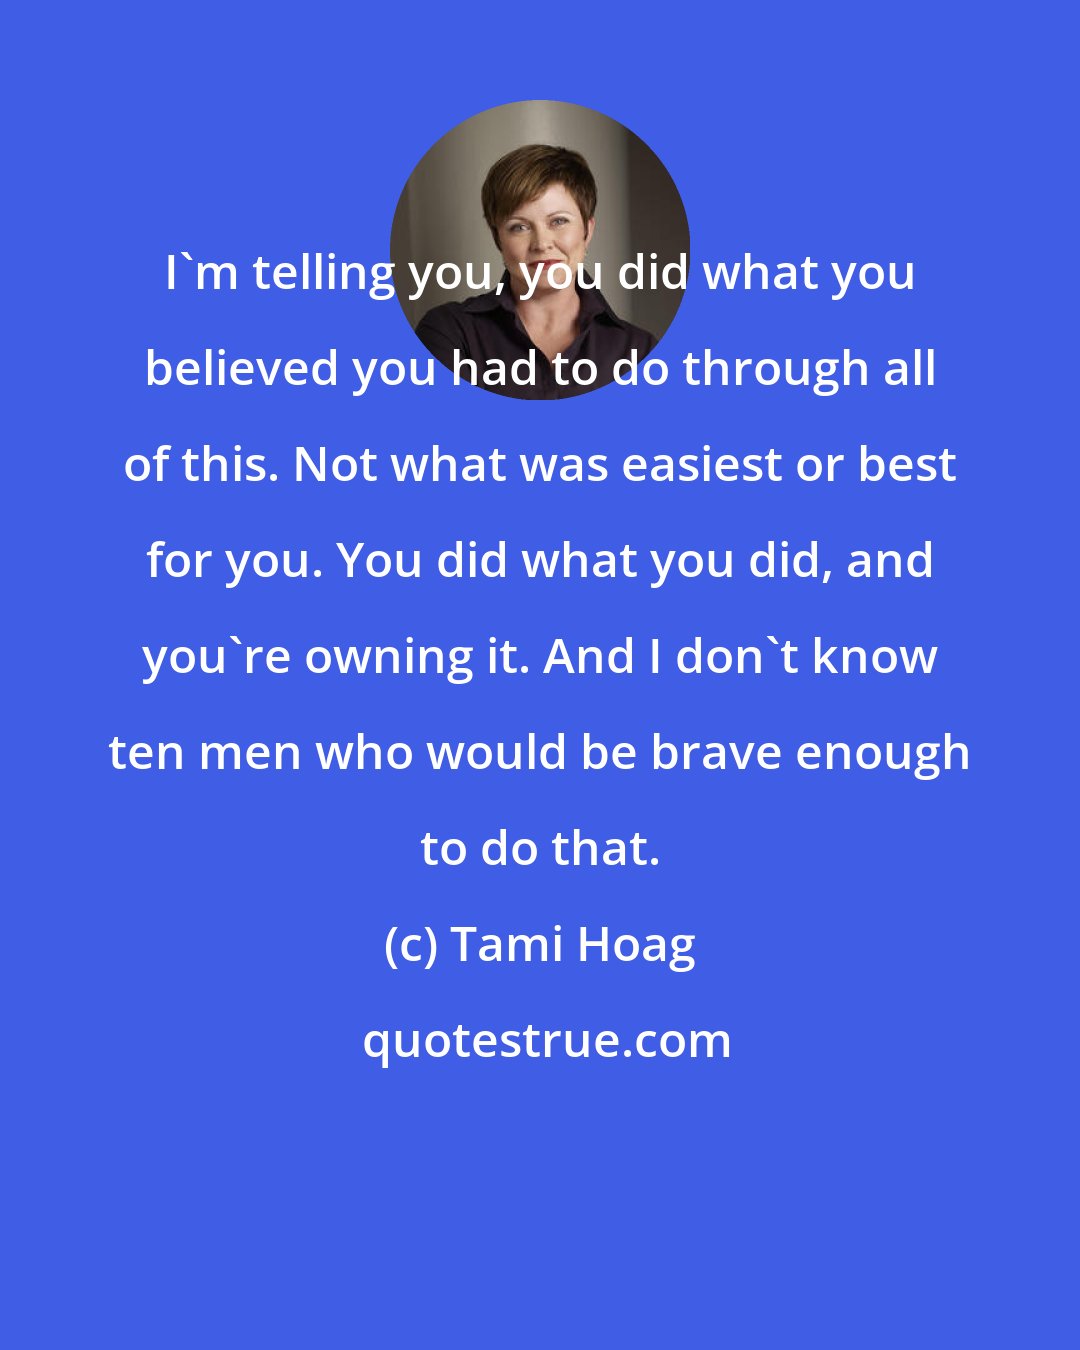 Tami Hoag: I'm telling you, you did what you believed you had to do through all of this. Not what was easiest or best for you. You did what you did, and you're owning it. And I don't know ten men who would be brave enough to do that.